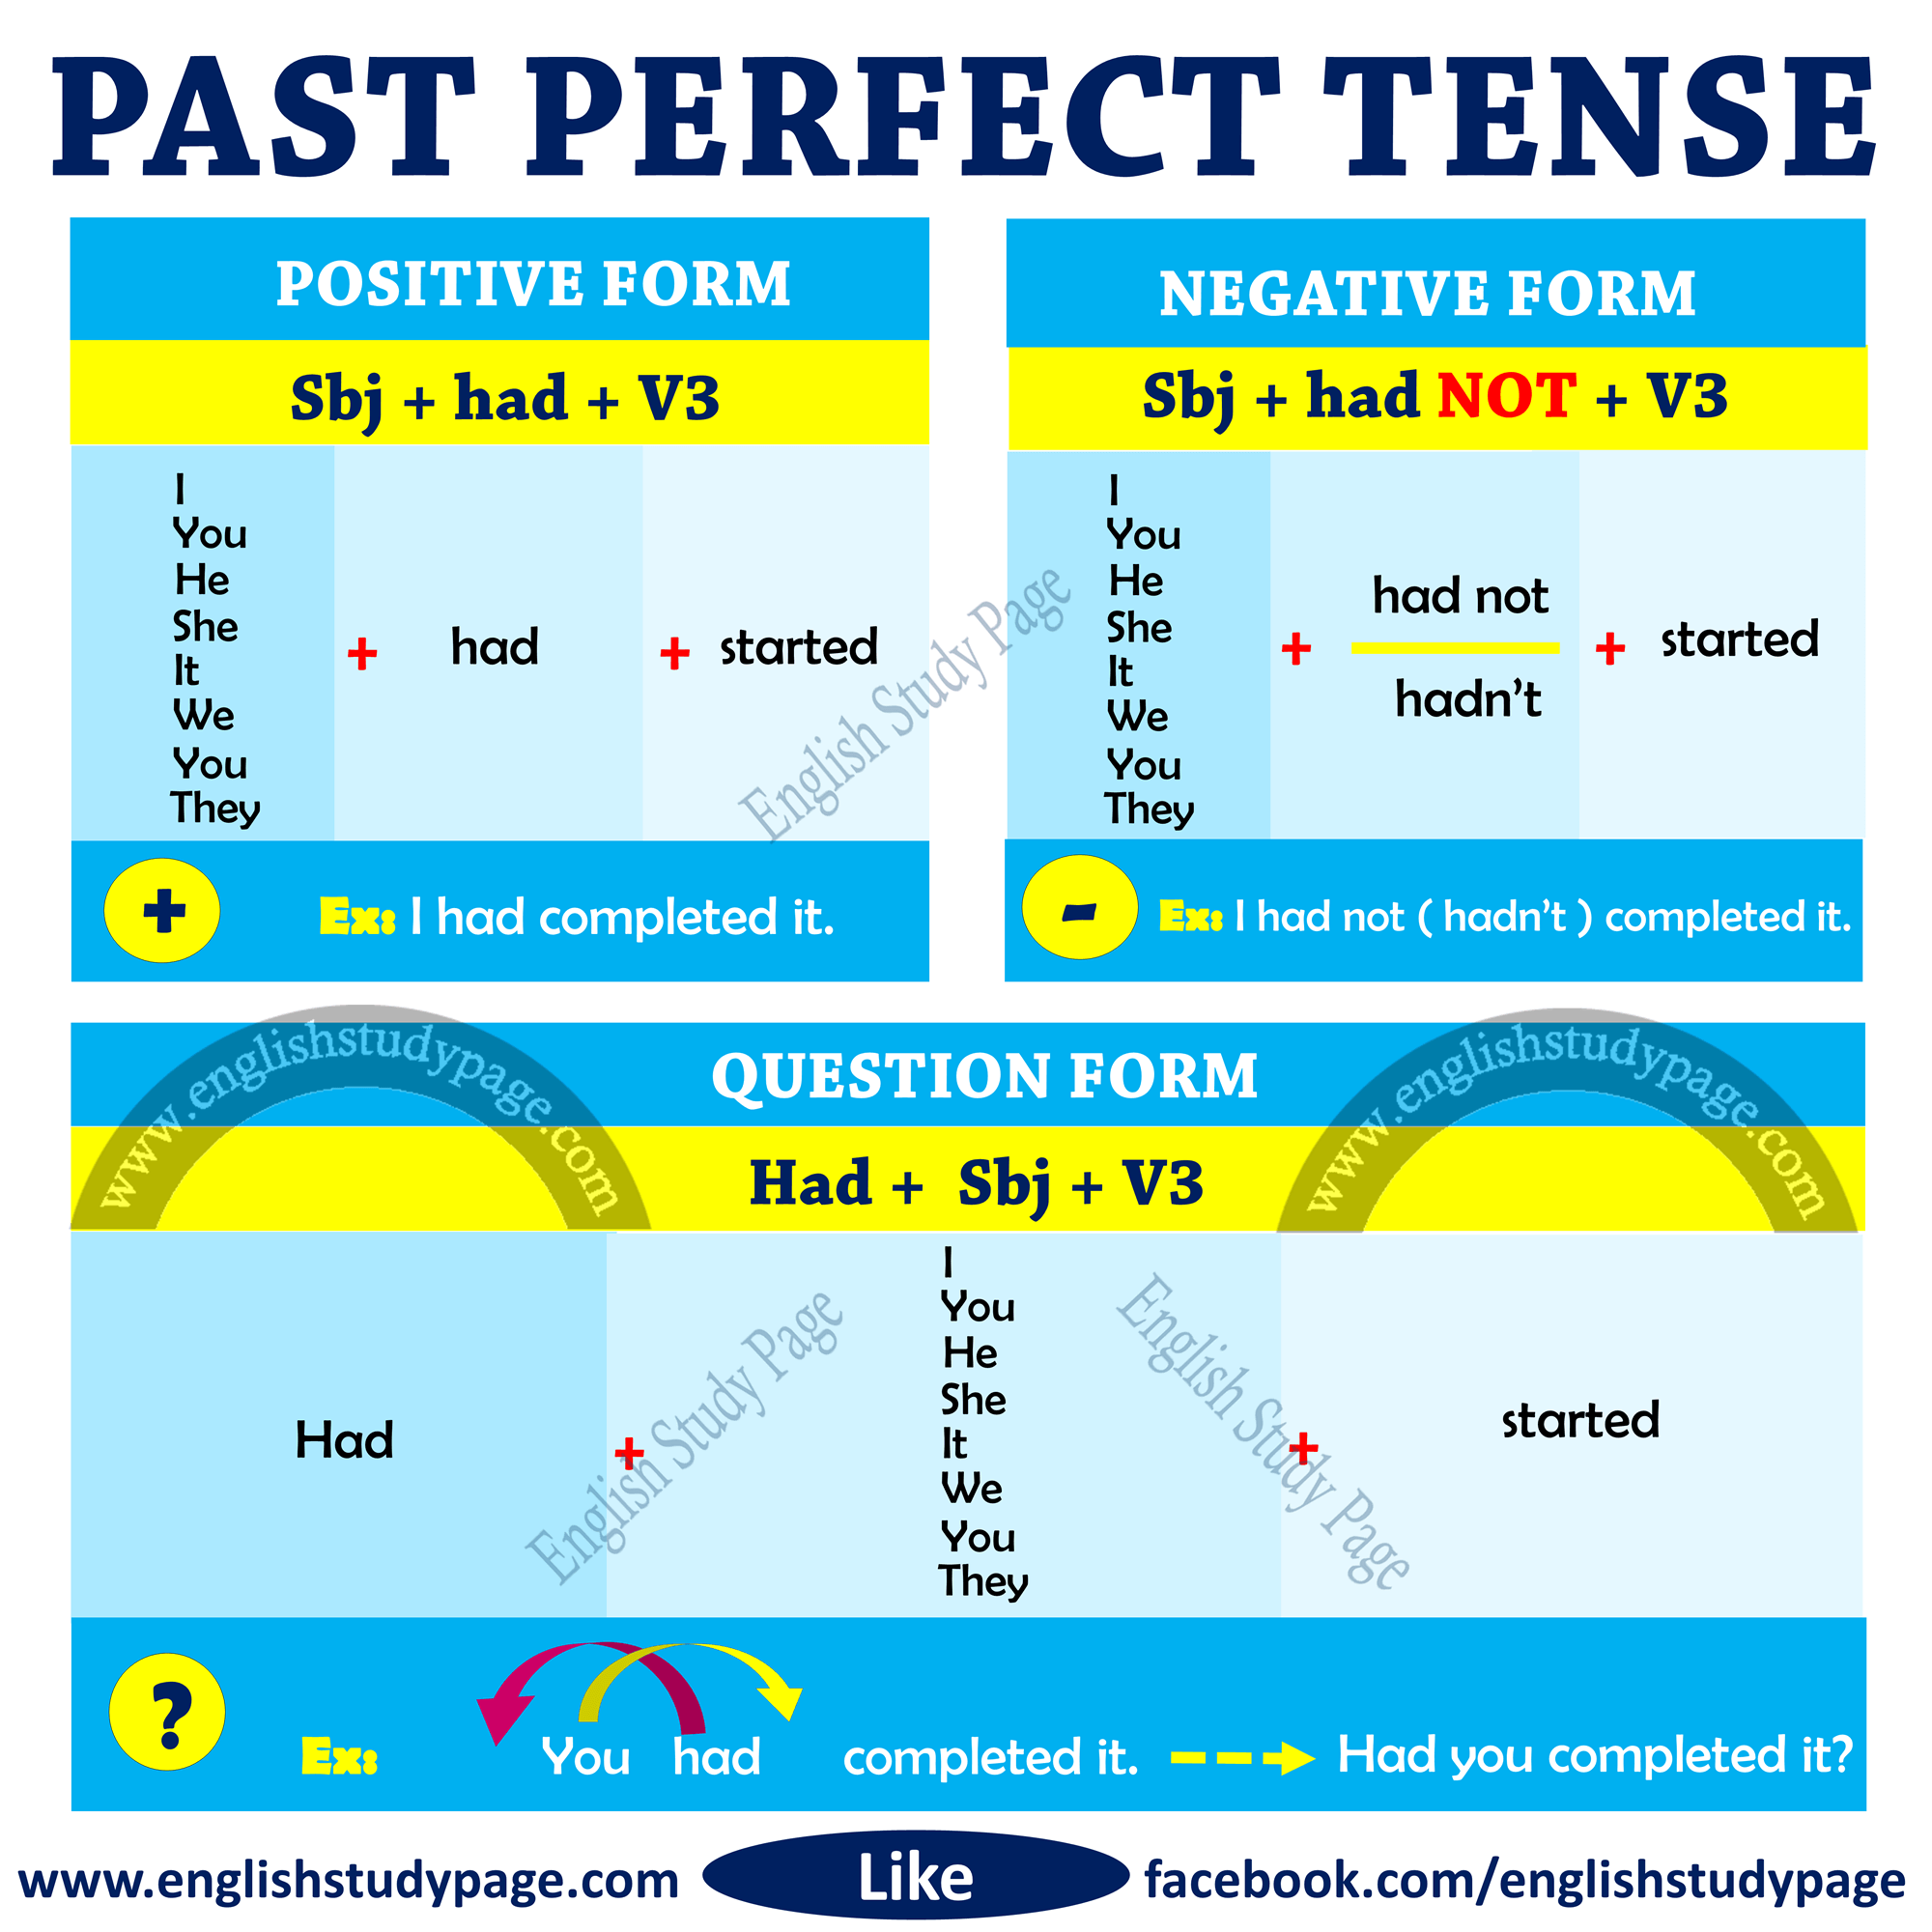 Past perfect tense глаголы. Past perfect. Past perfect Continuous structure. Perfect simple structure. Run past perfect.